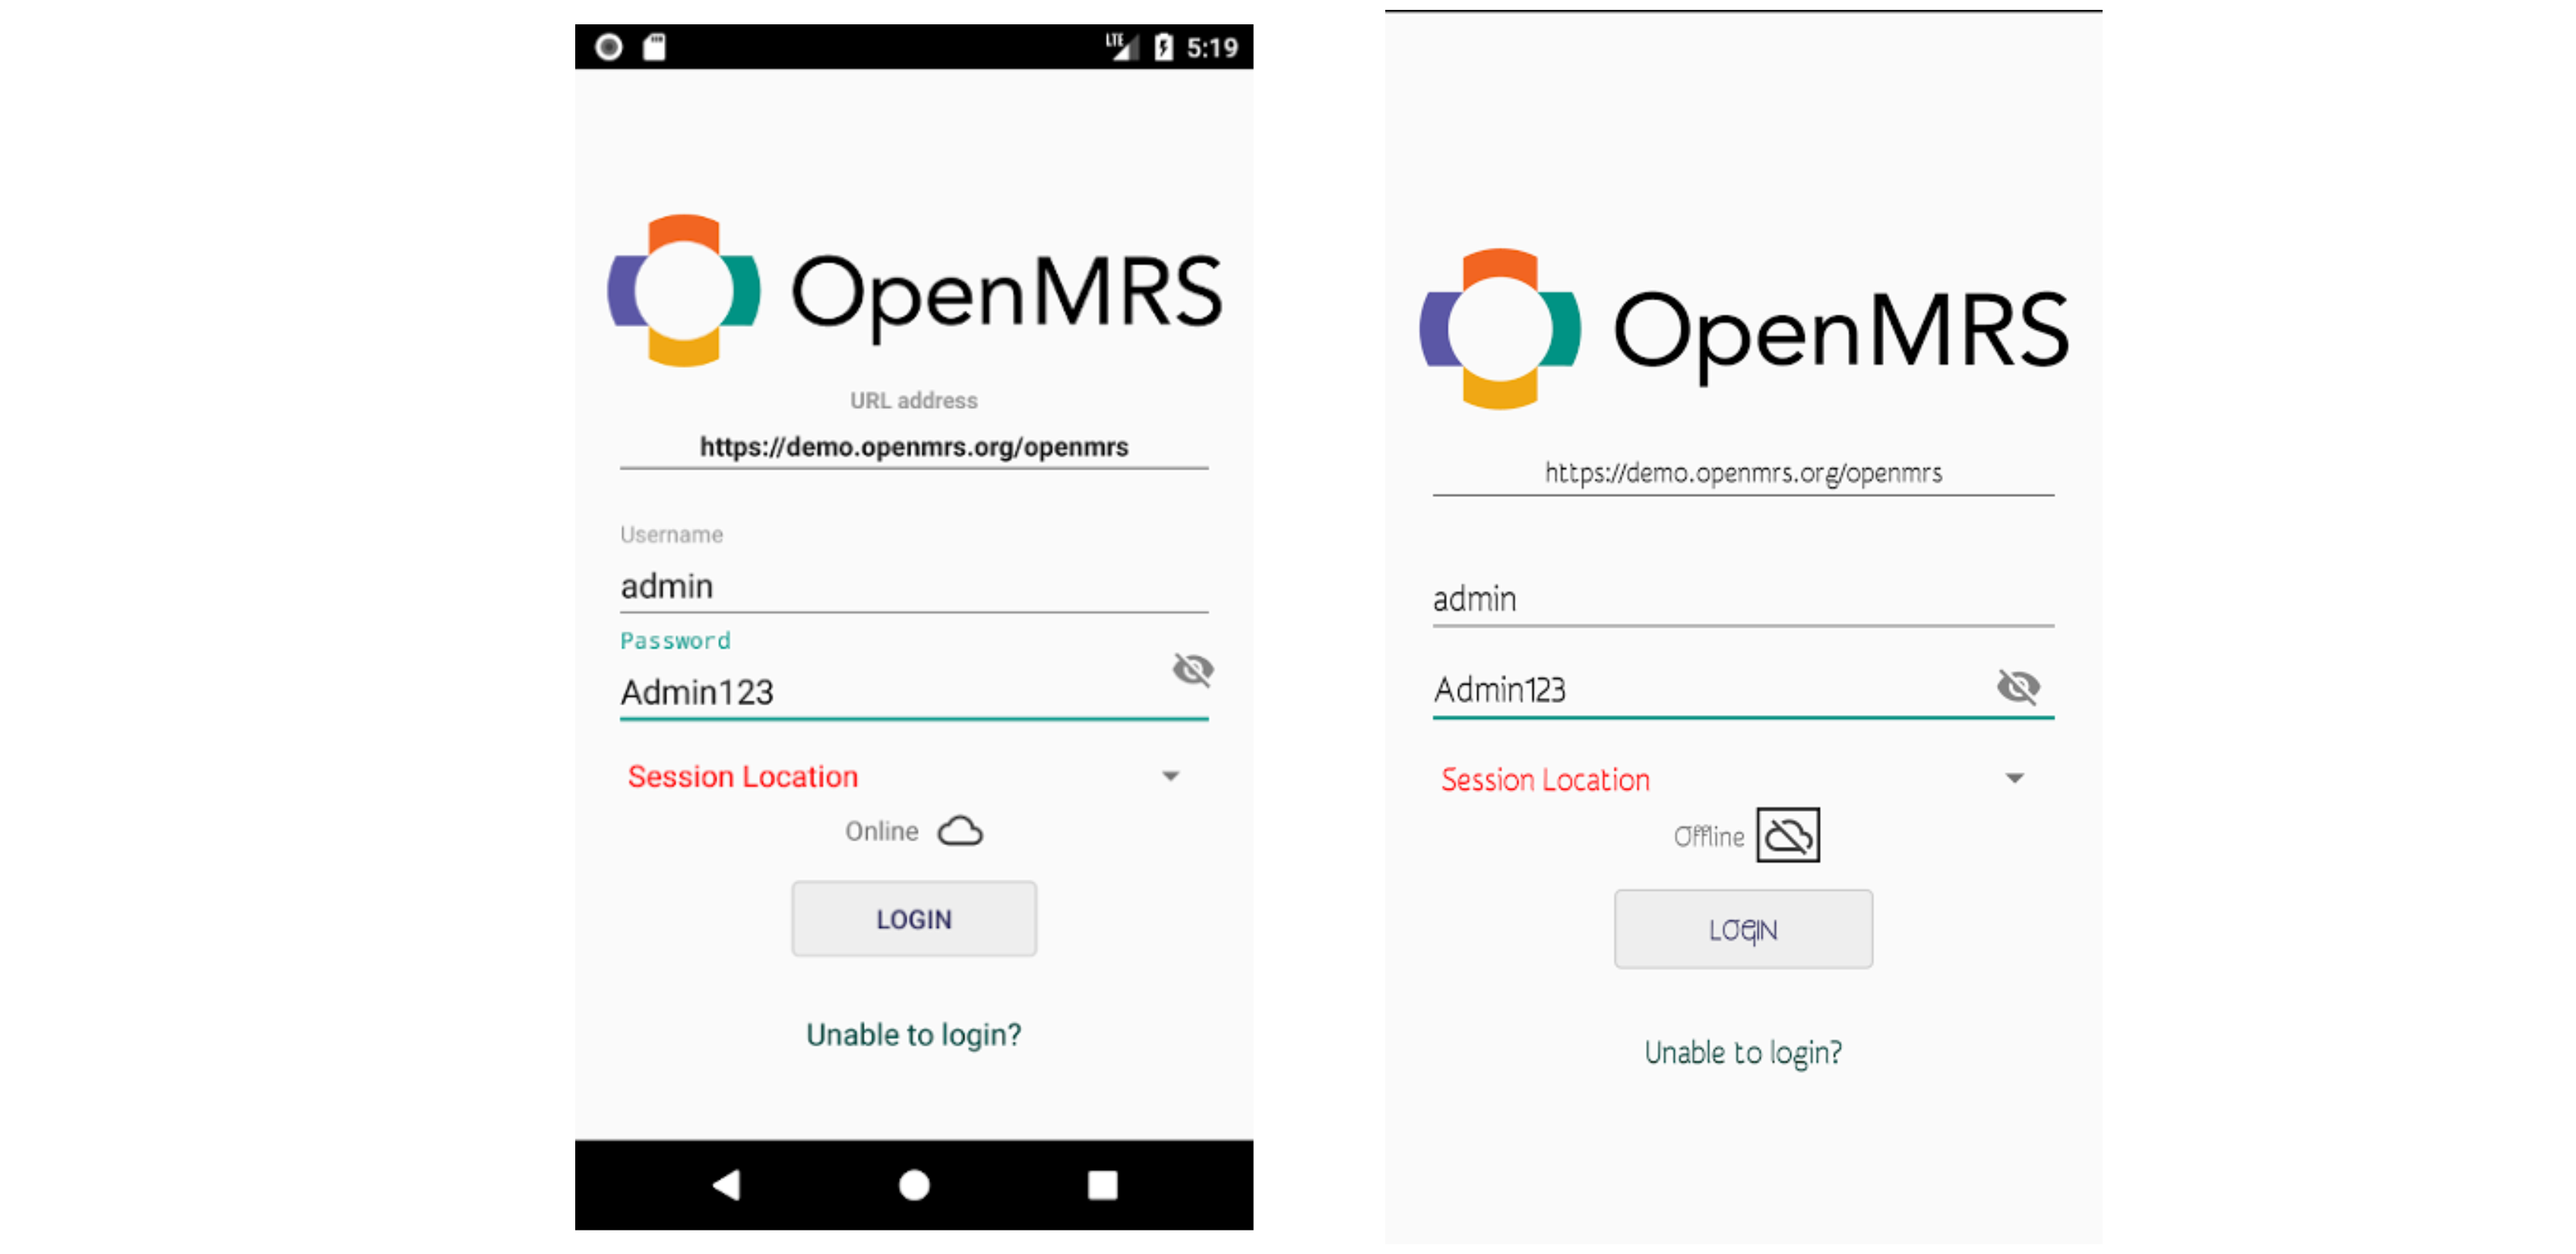 OpenMRS Android Client Offline login screen